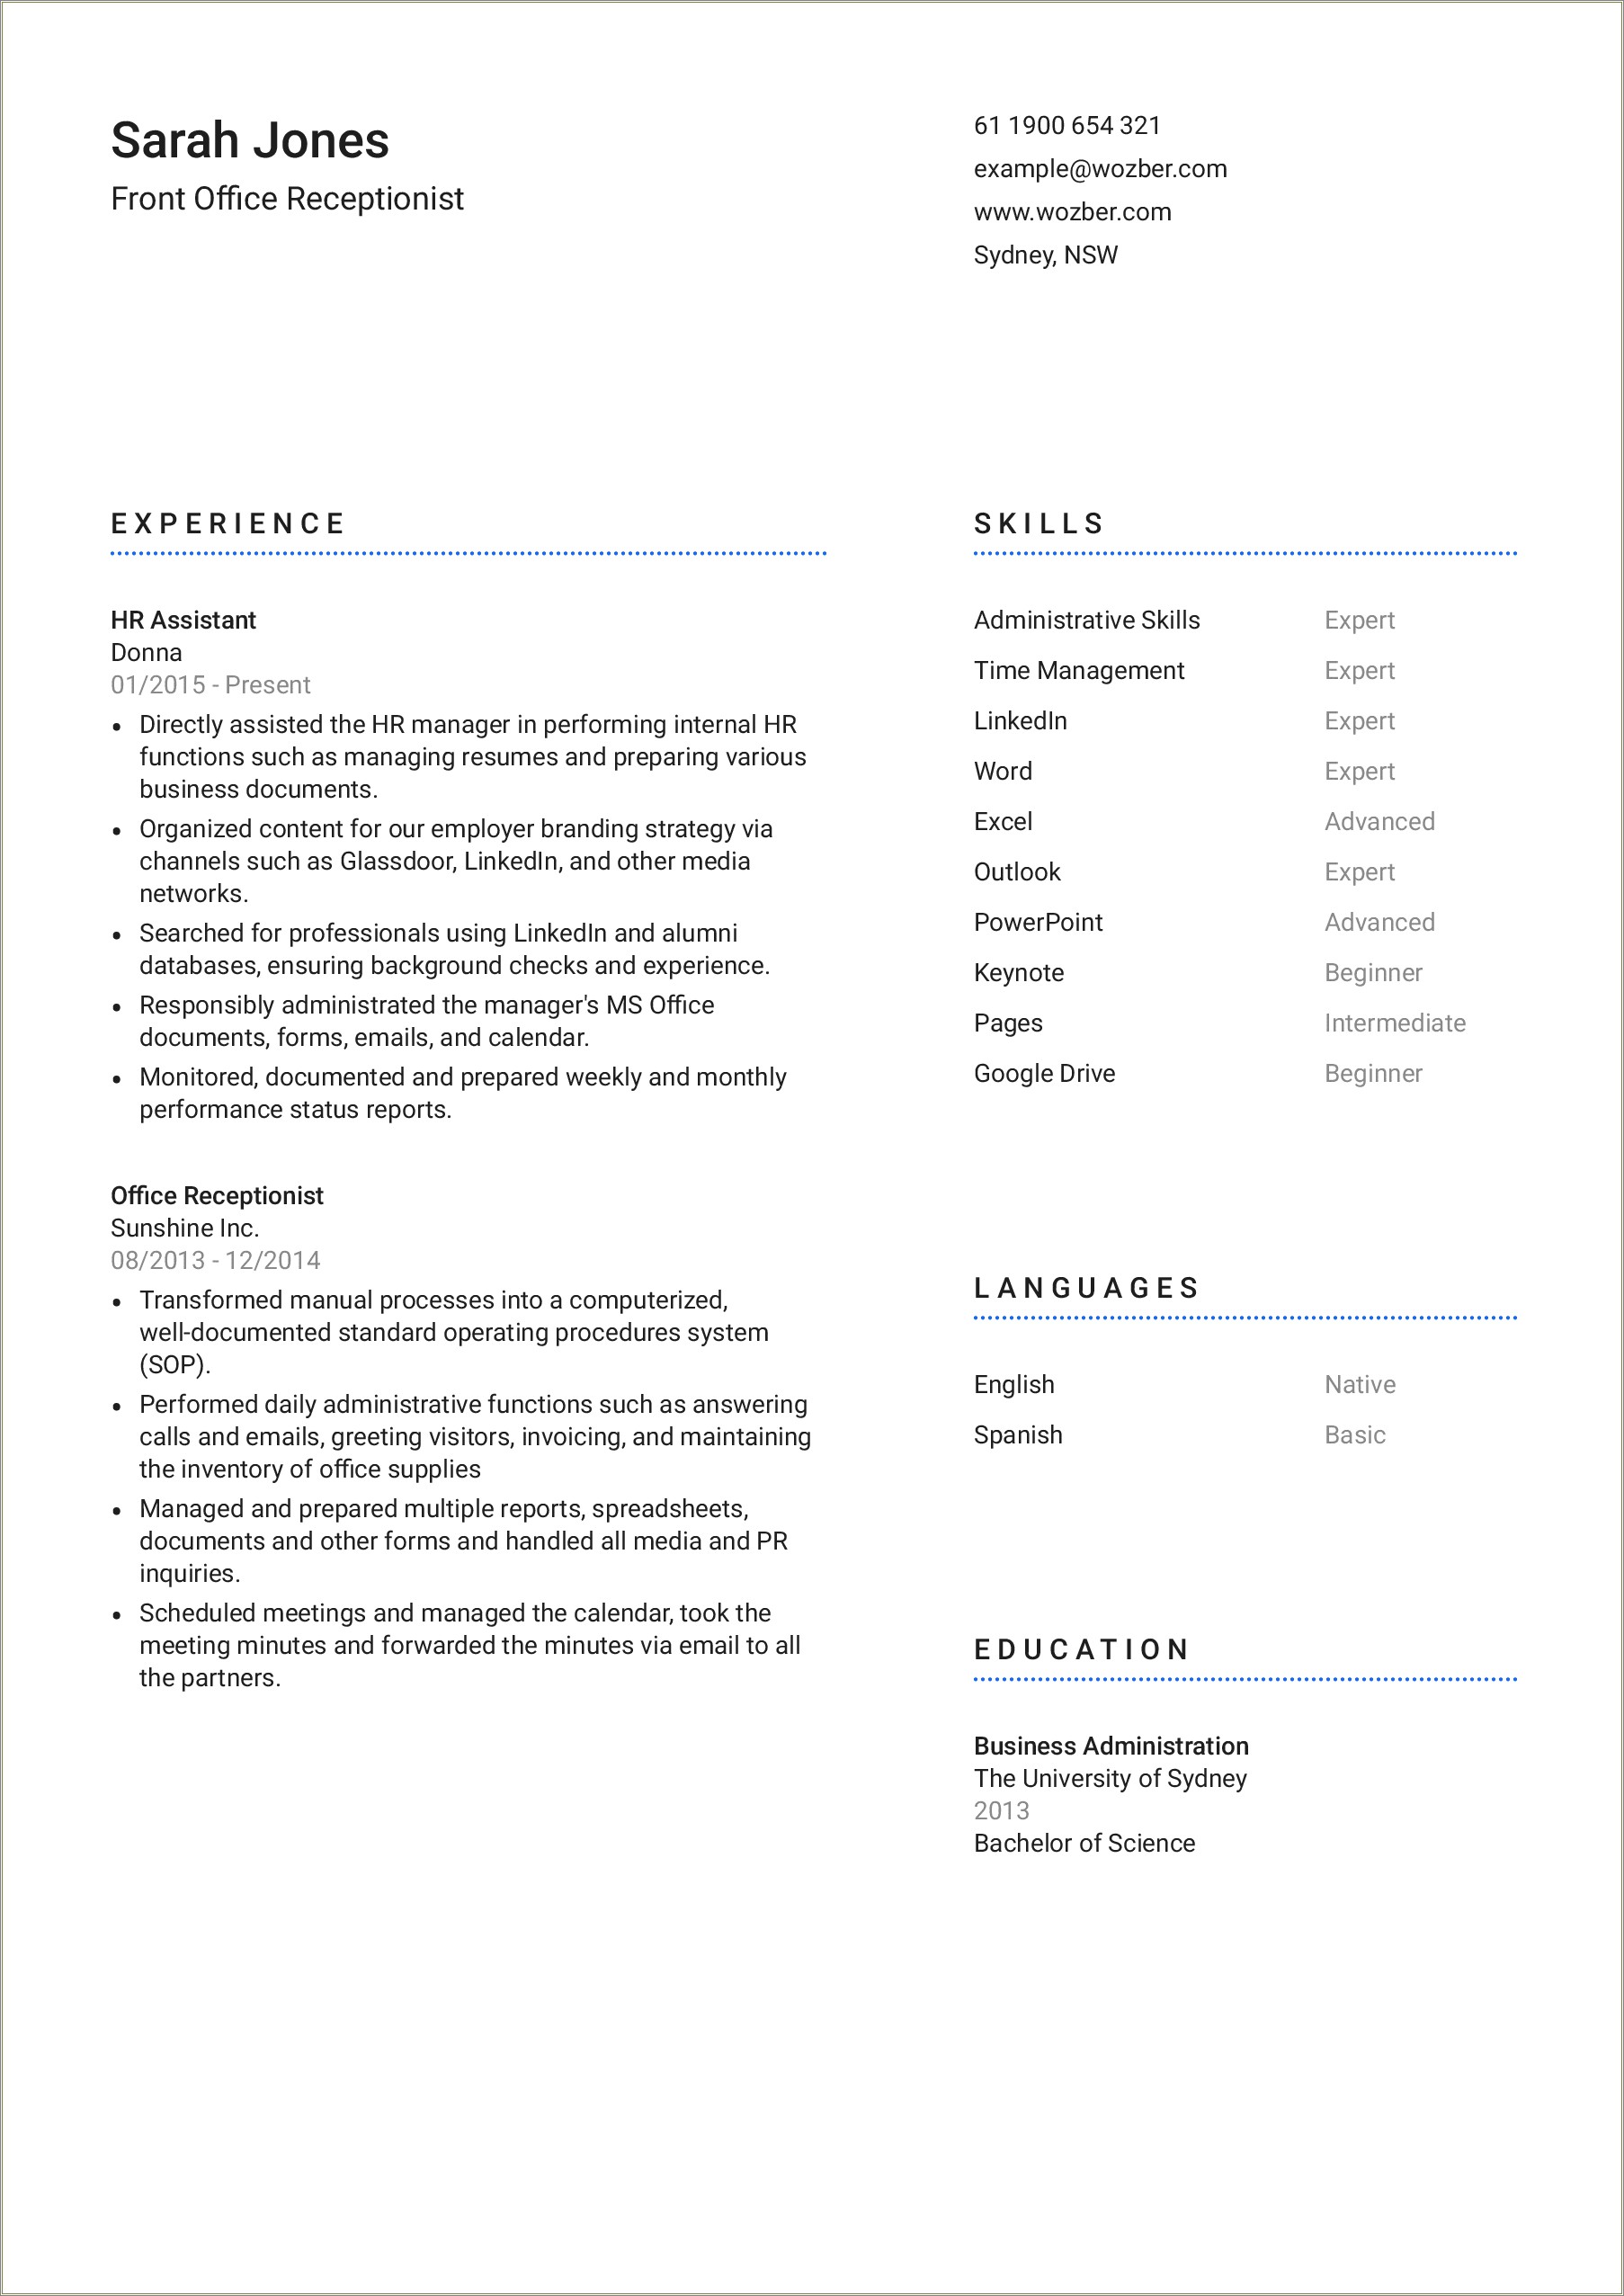 Different Kinds Of Skills To Put On Resume